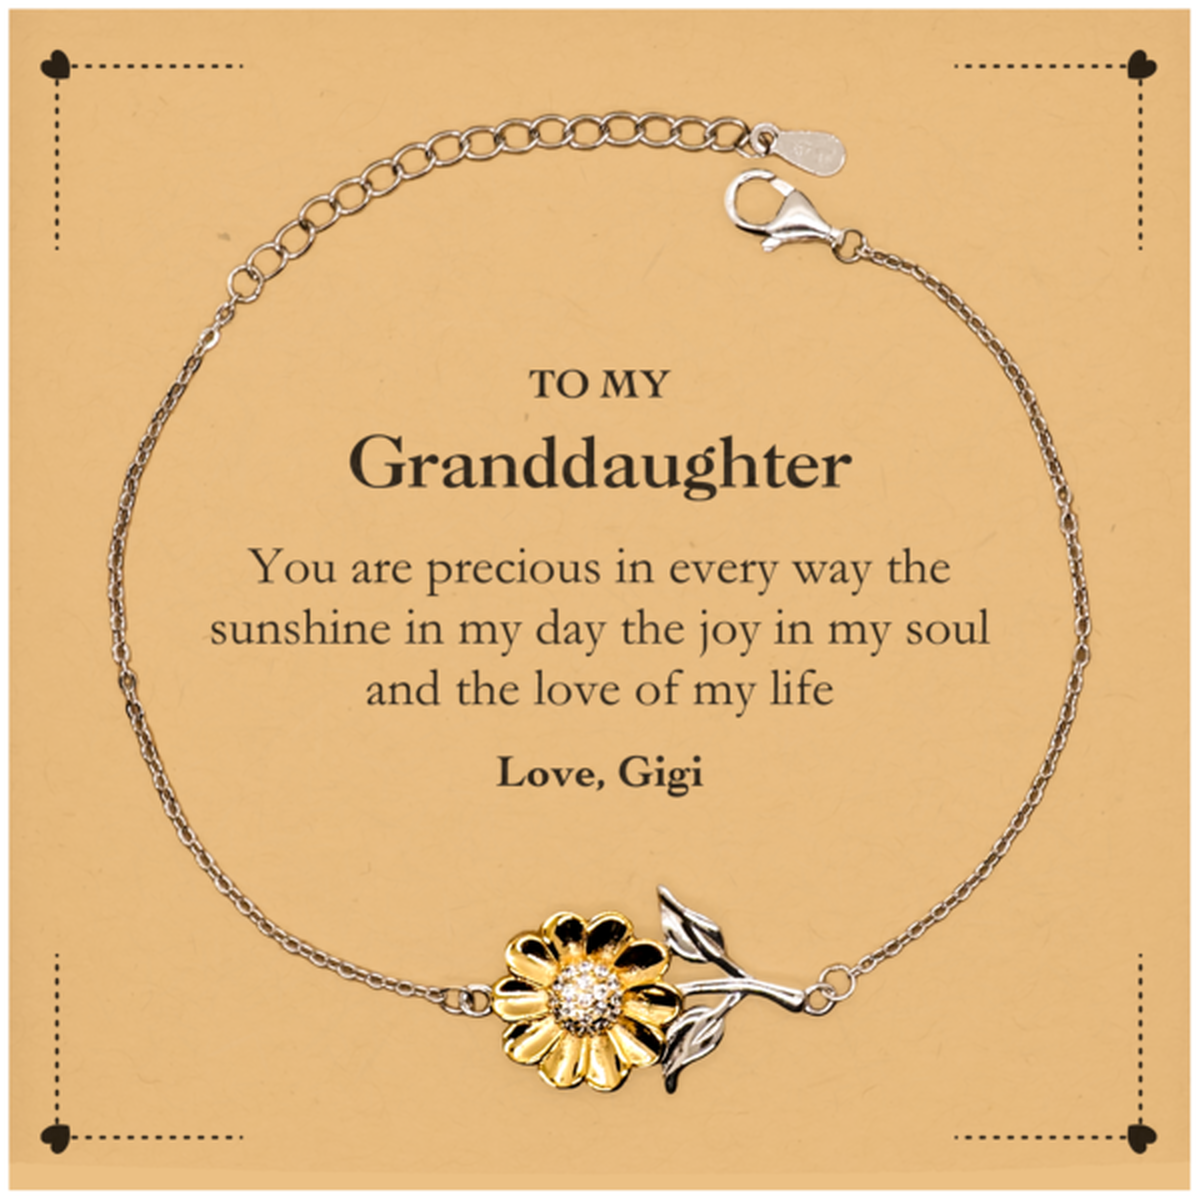 Graduation Gifts for Granddaughter Sunflower Bracelet Present from Gigi, Christmas Granddaughter Birthday Gifts Granddaughter You are precious in every way the sunshine in my day. Love, Gigi